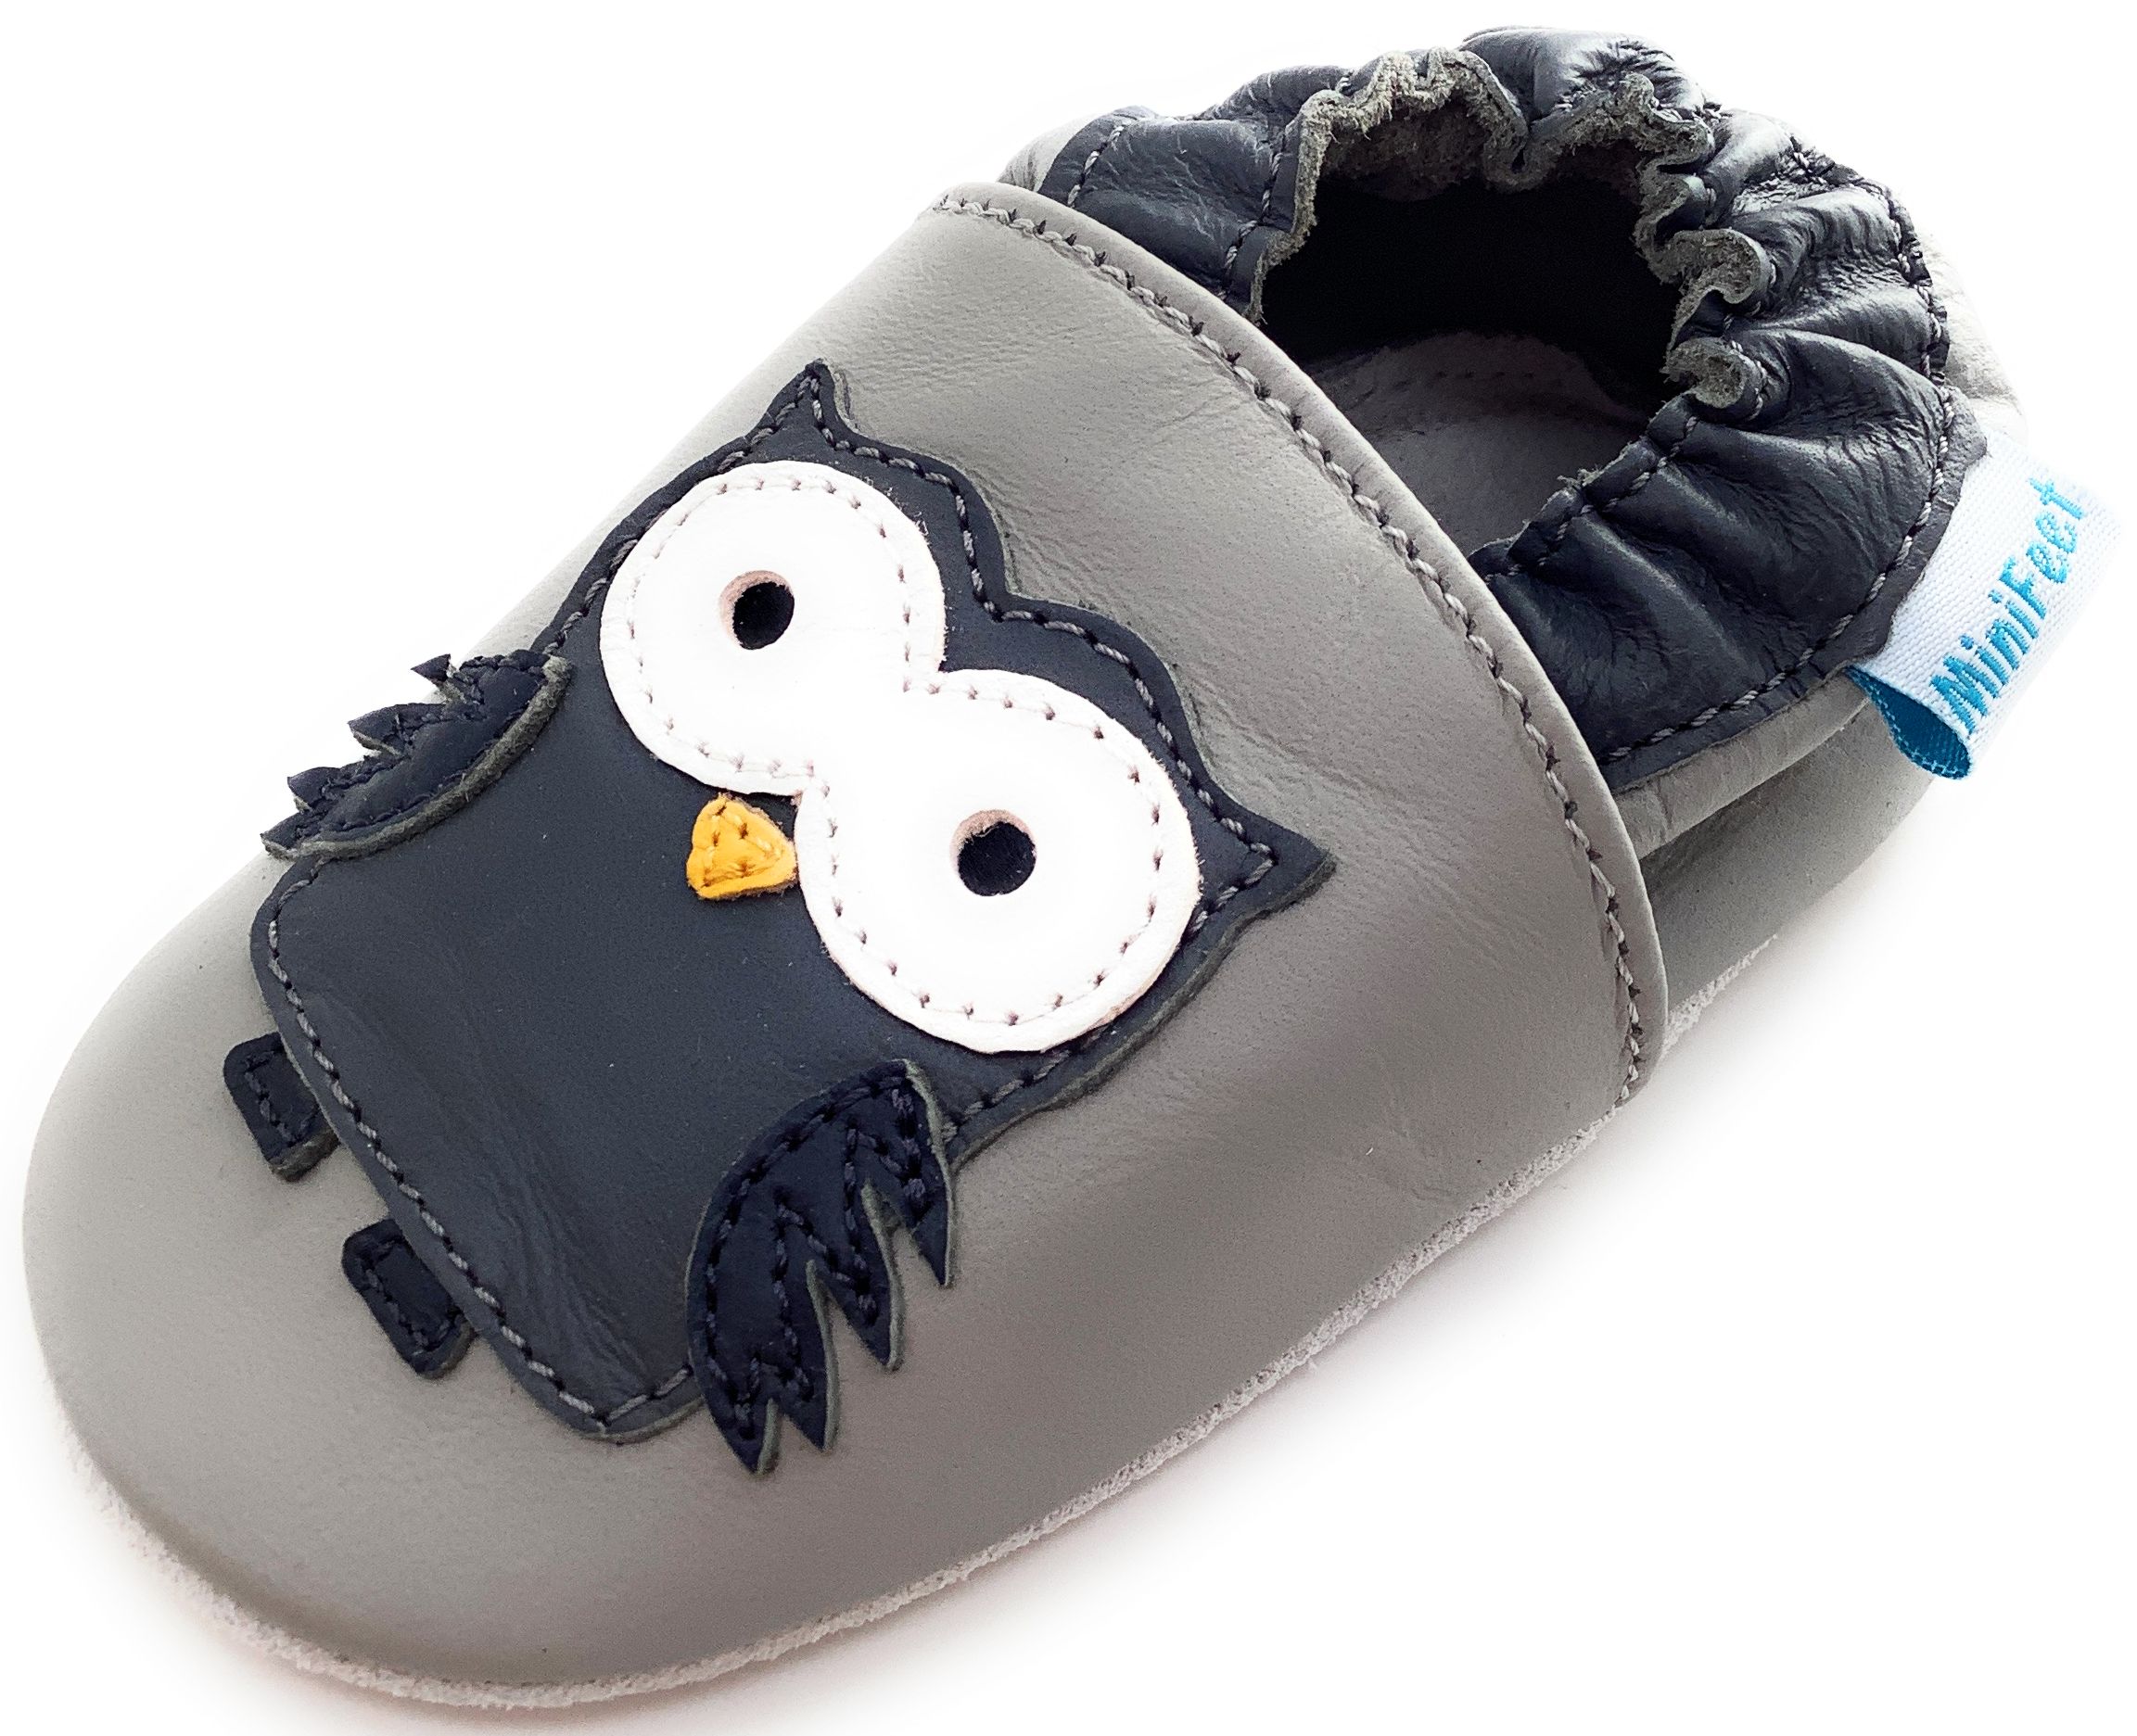 Toddler Shoes MiniFeet Soft Leather Baby Shoes Owl Shoes 0-6 Months to 4-5 Years 